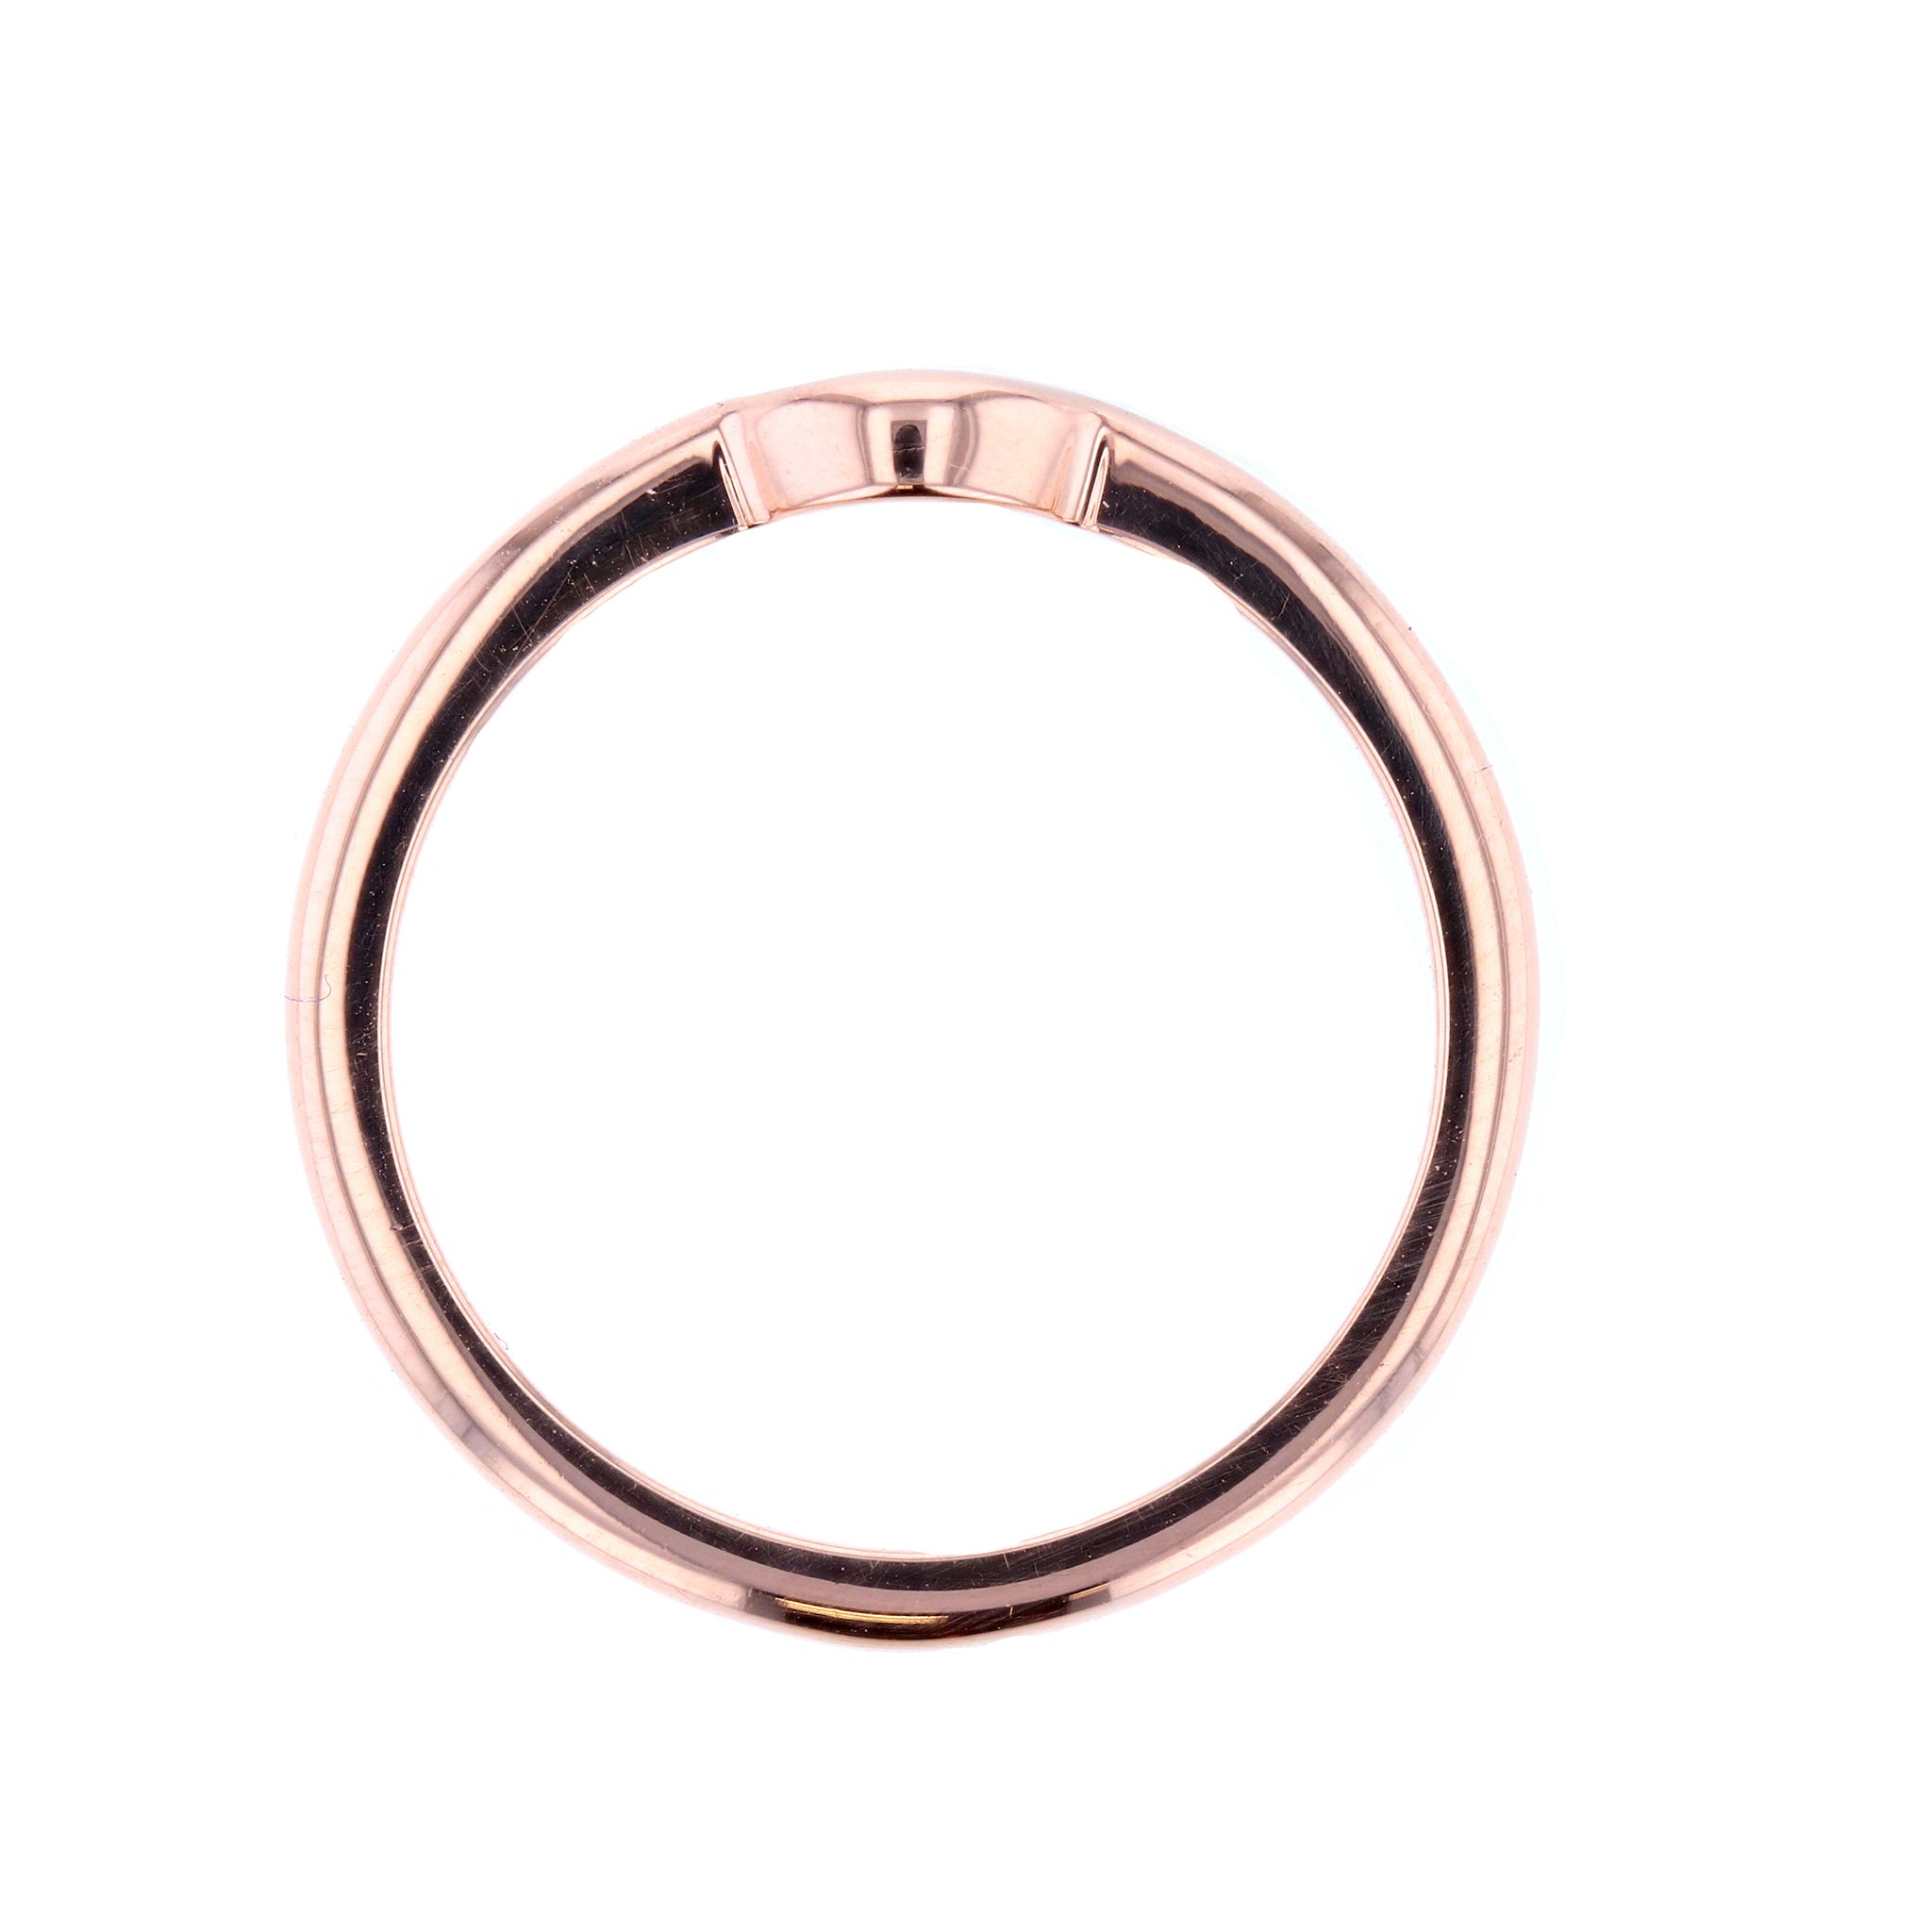 Women's Flush Fit Wedding Band in Rose Gold